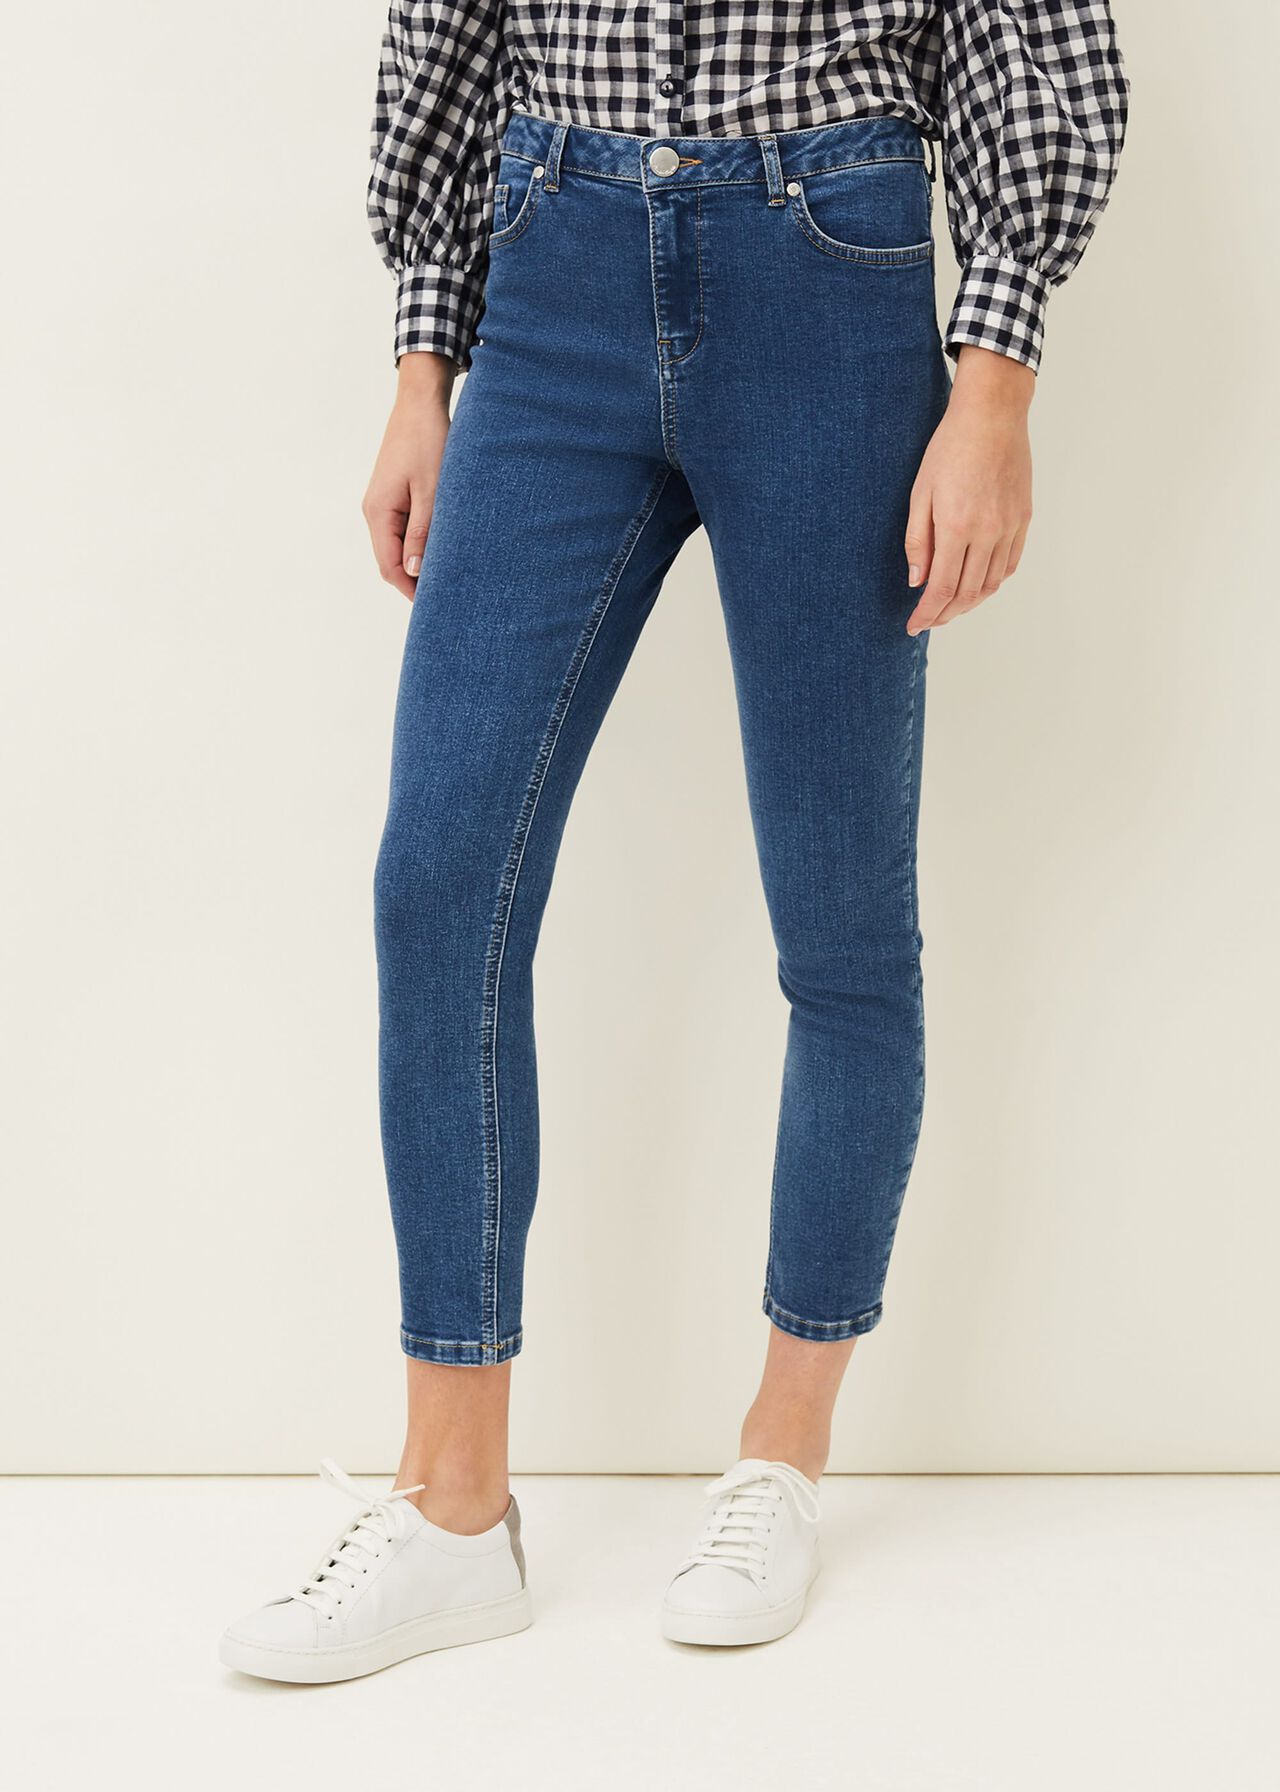 Pax Slim Fit Cropped Jeans